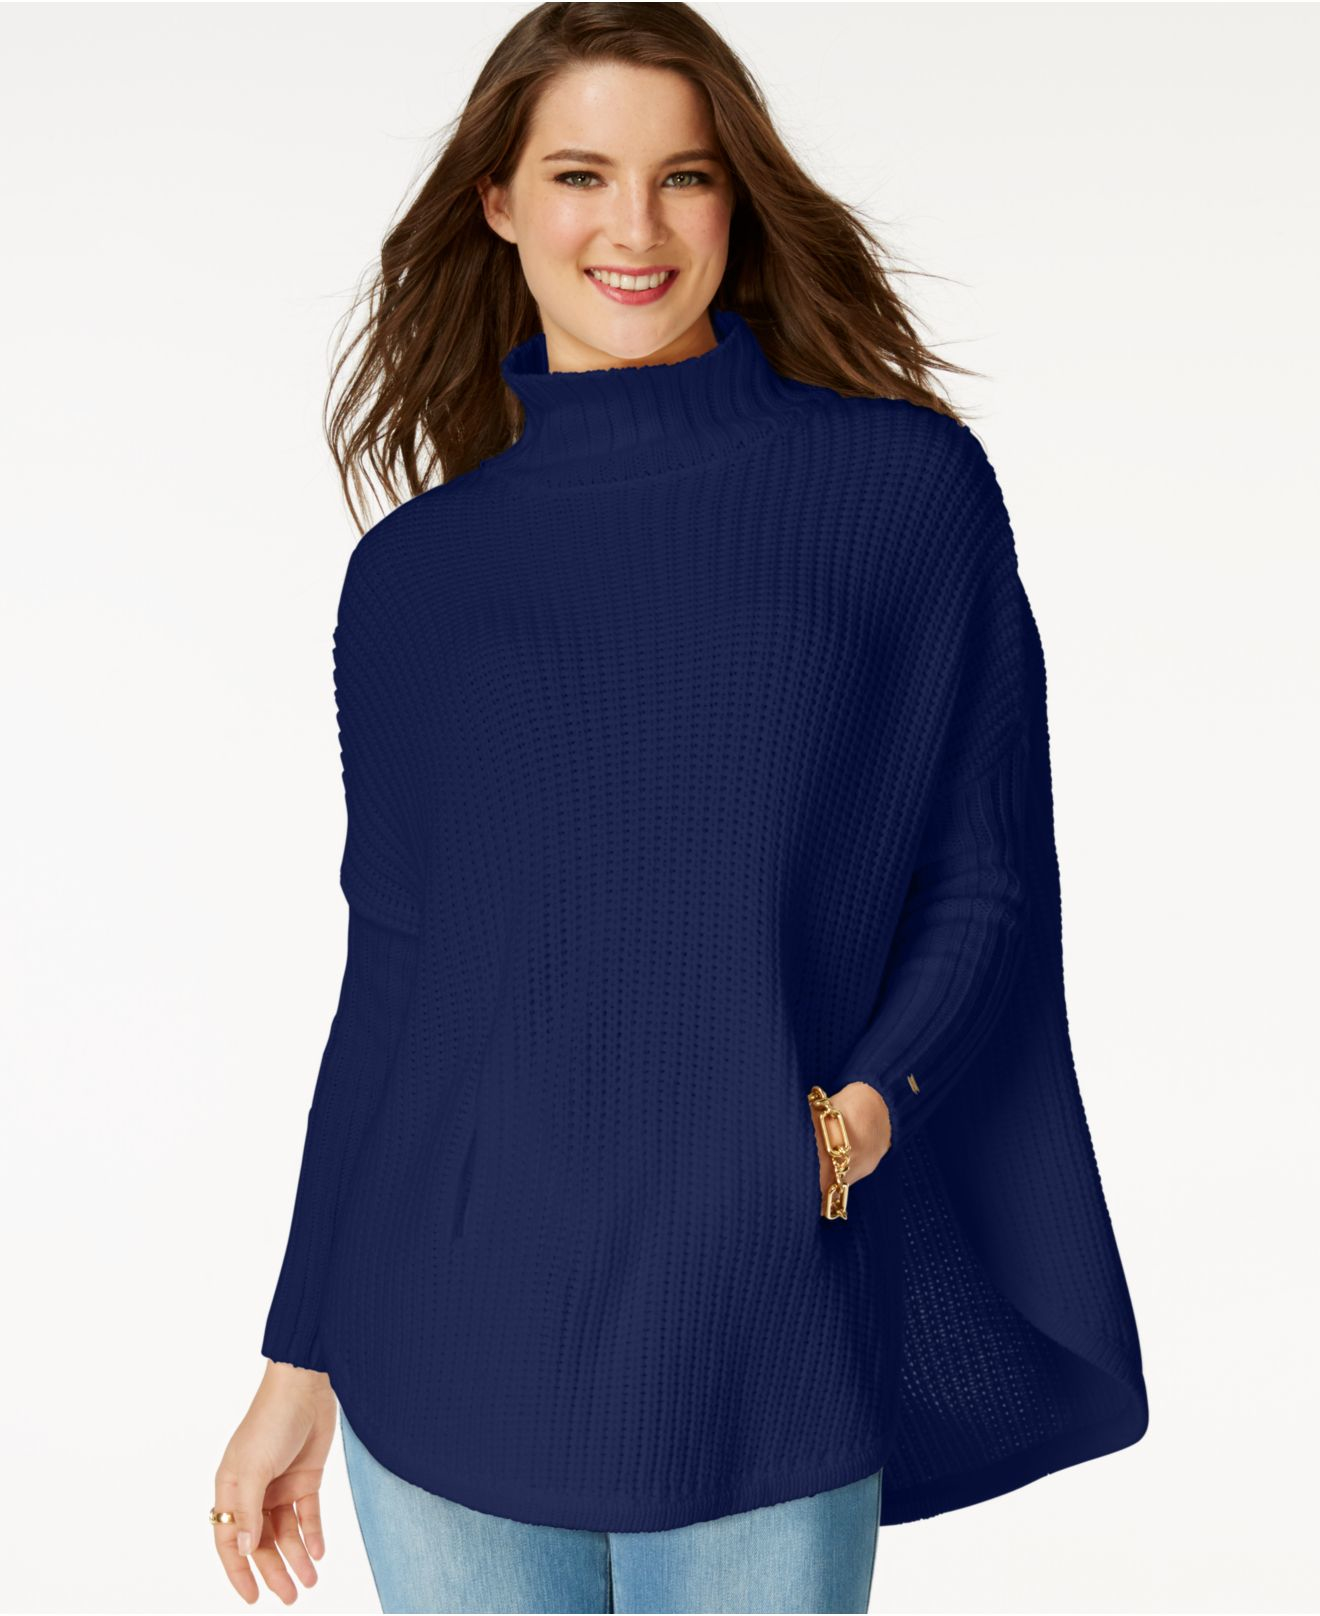 Lyst - Tommy Hilfiger Long-sleeve Mock-neck Pullover Sweater in Blue